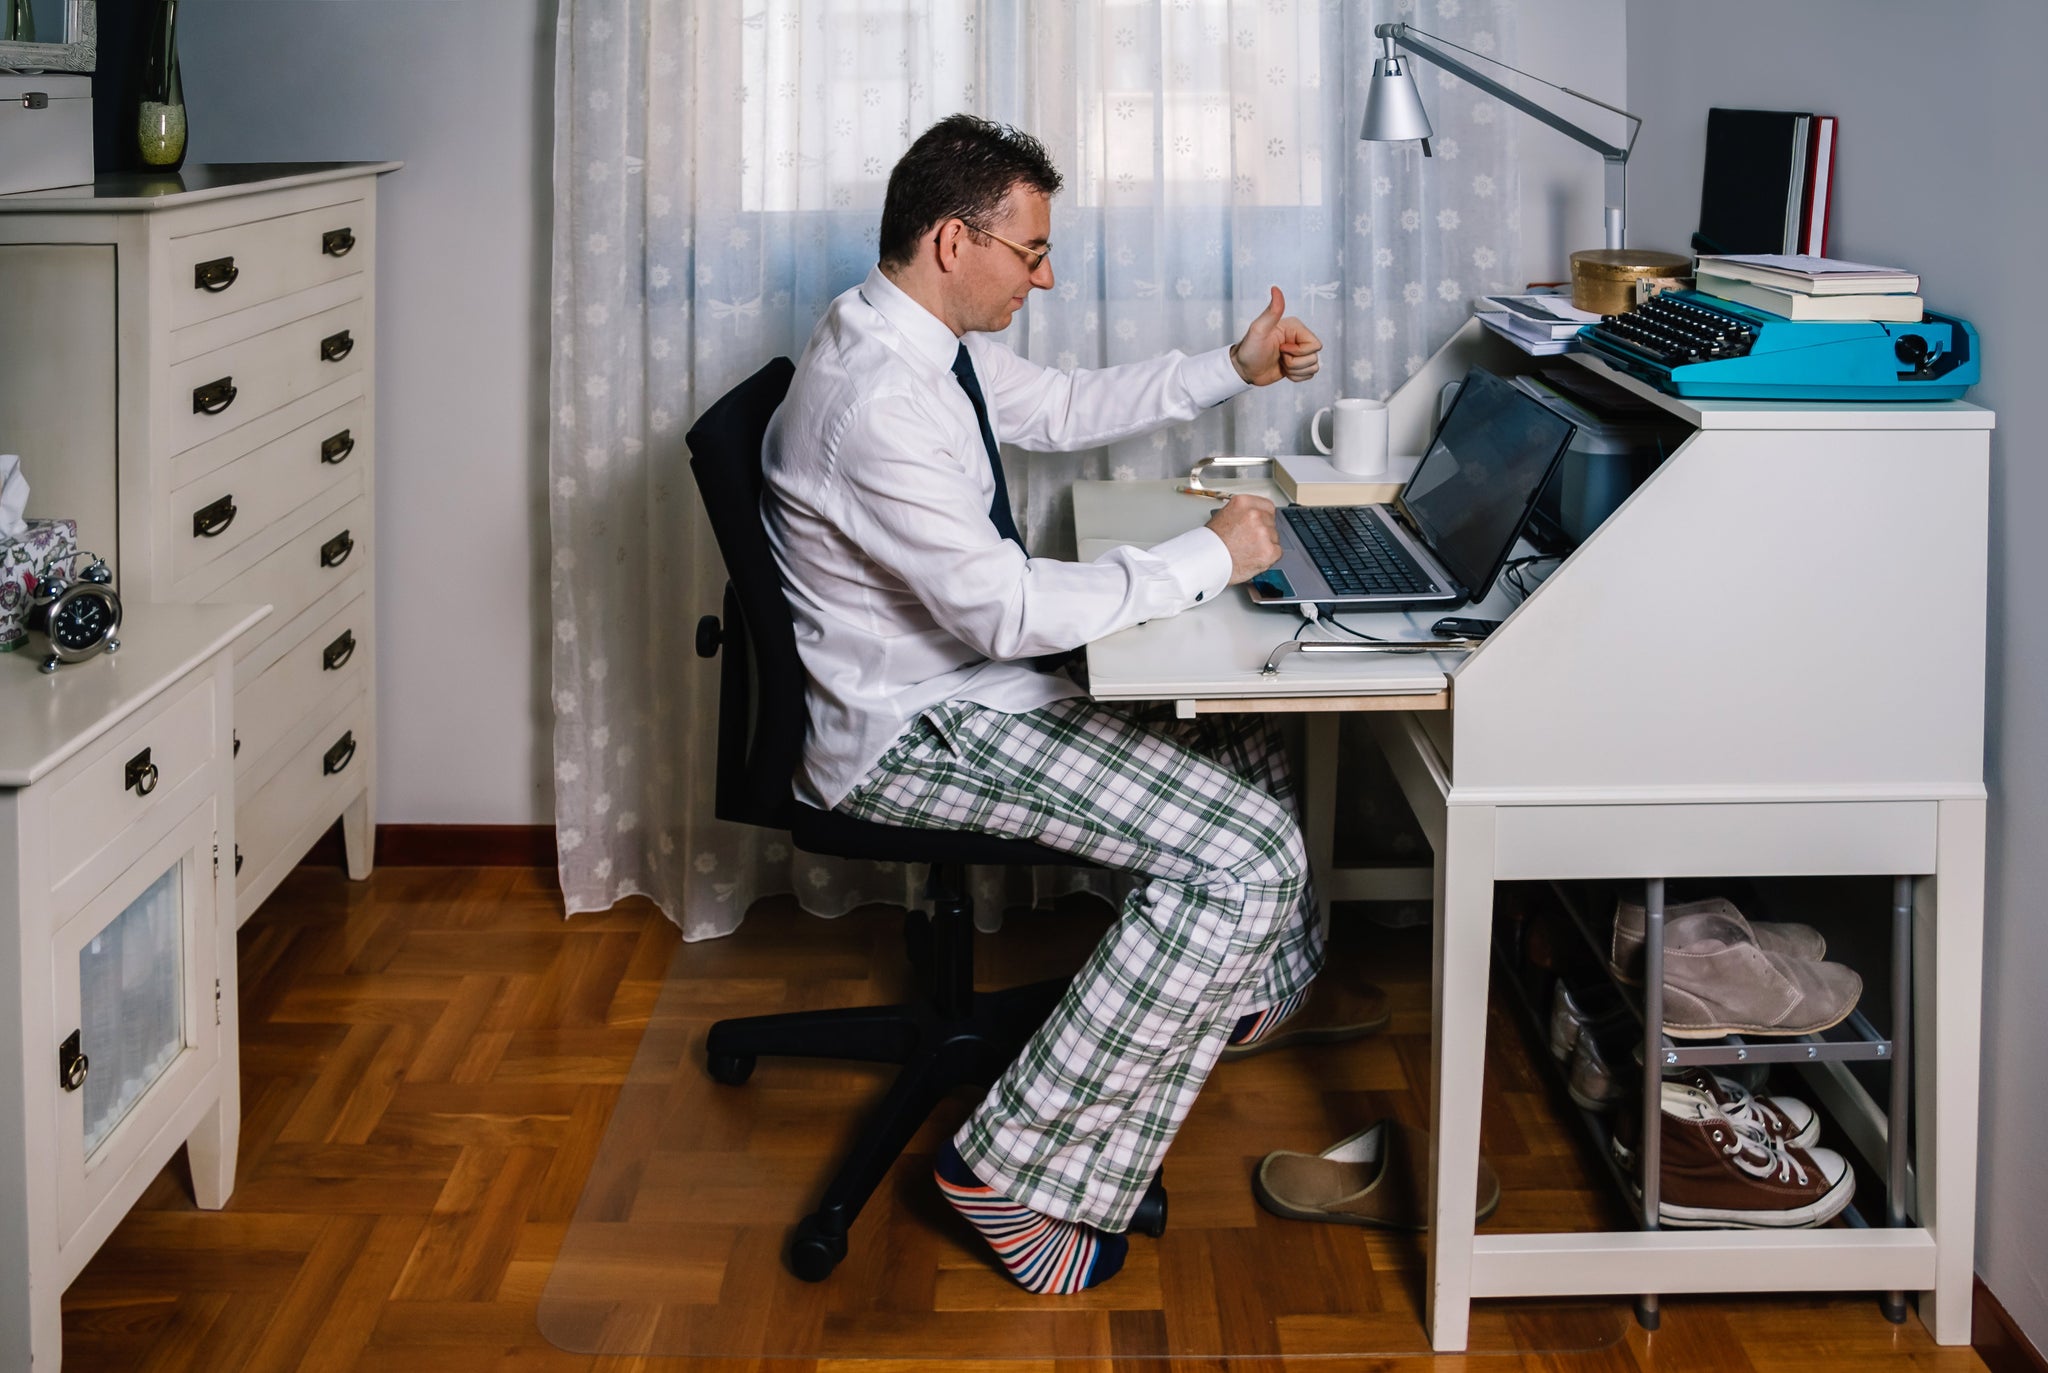 How to stay productive when working from home